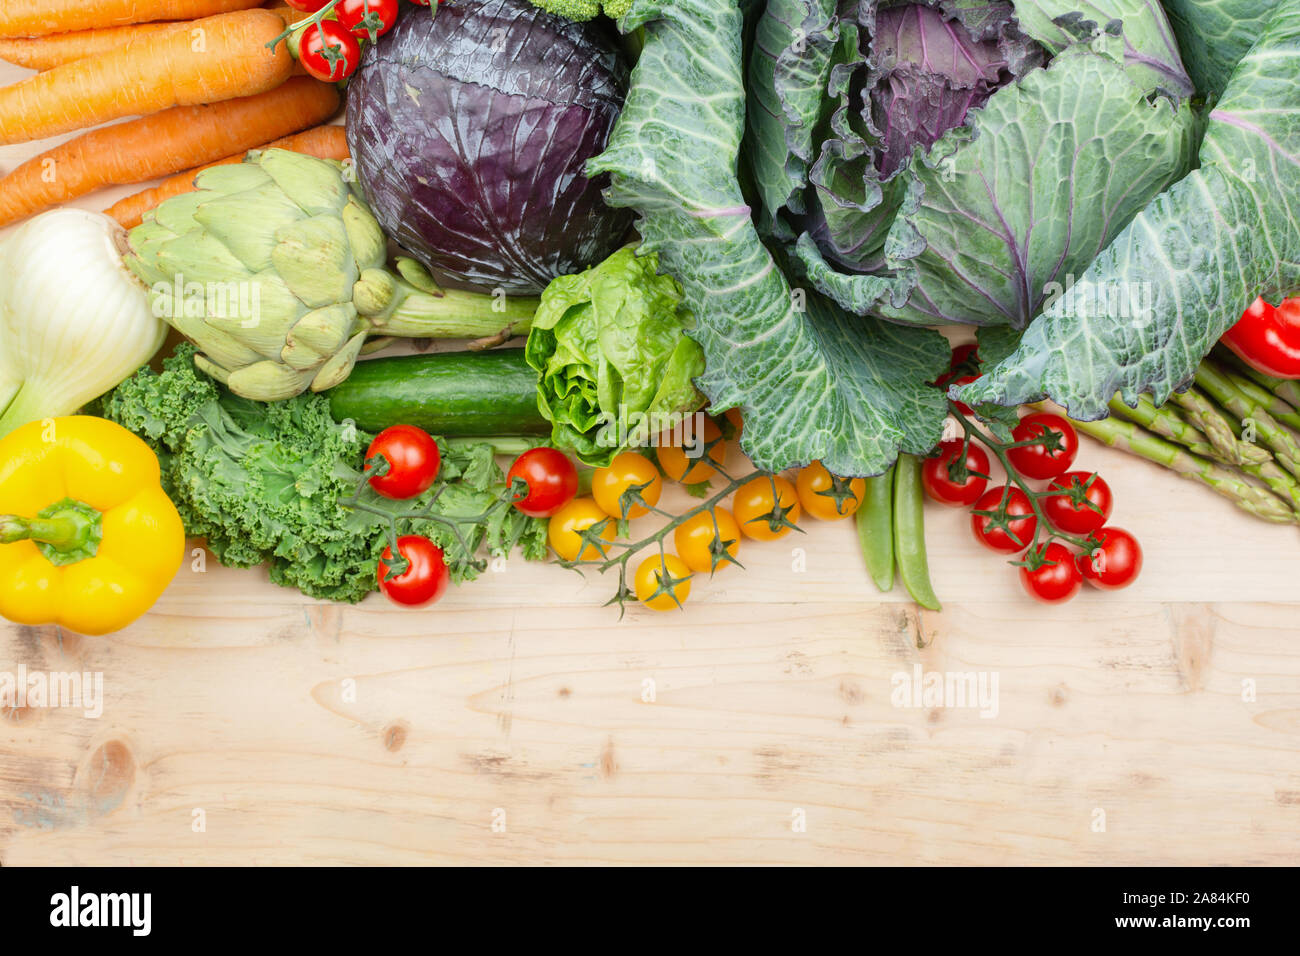 Top view of vegetables on wooden table, carrots velery tomatoes cabbage broccoli, copy space, selective focus Stock Photo